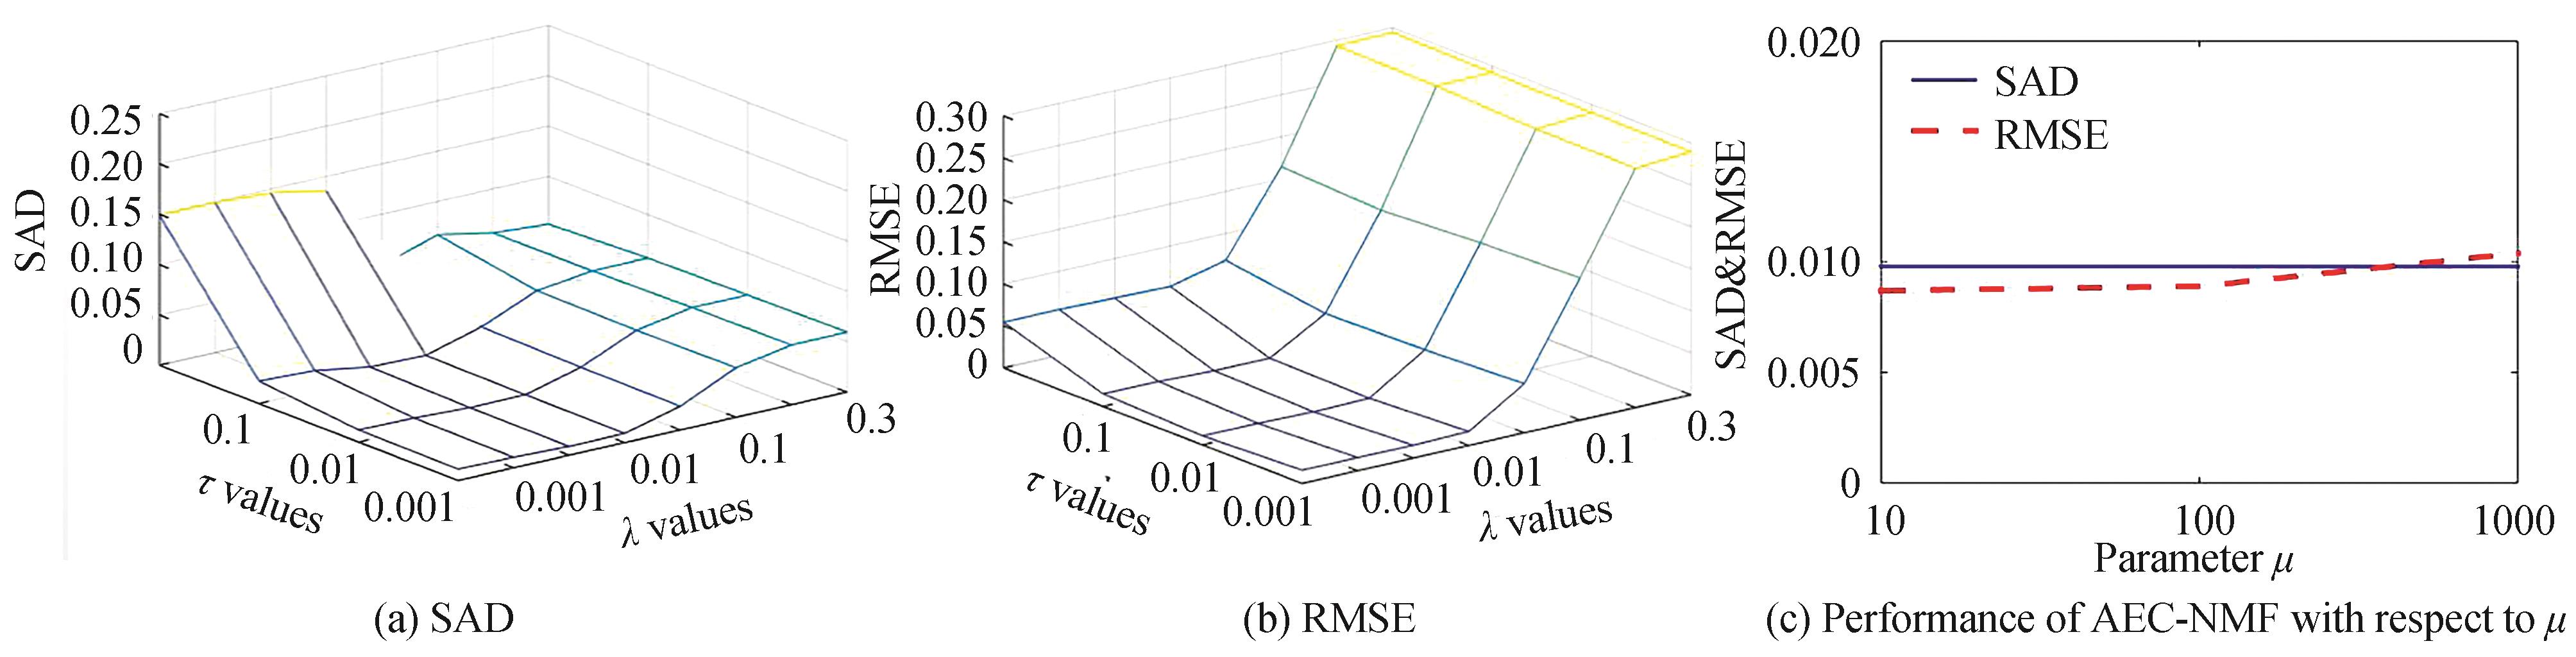 Performance of AEC-NMF with respect to parameters λ,μ and τ in terms of SAD and RMSE